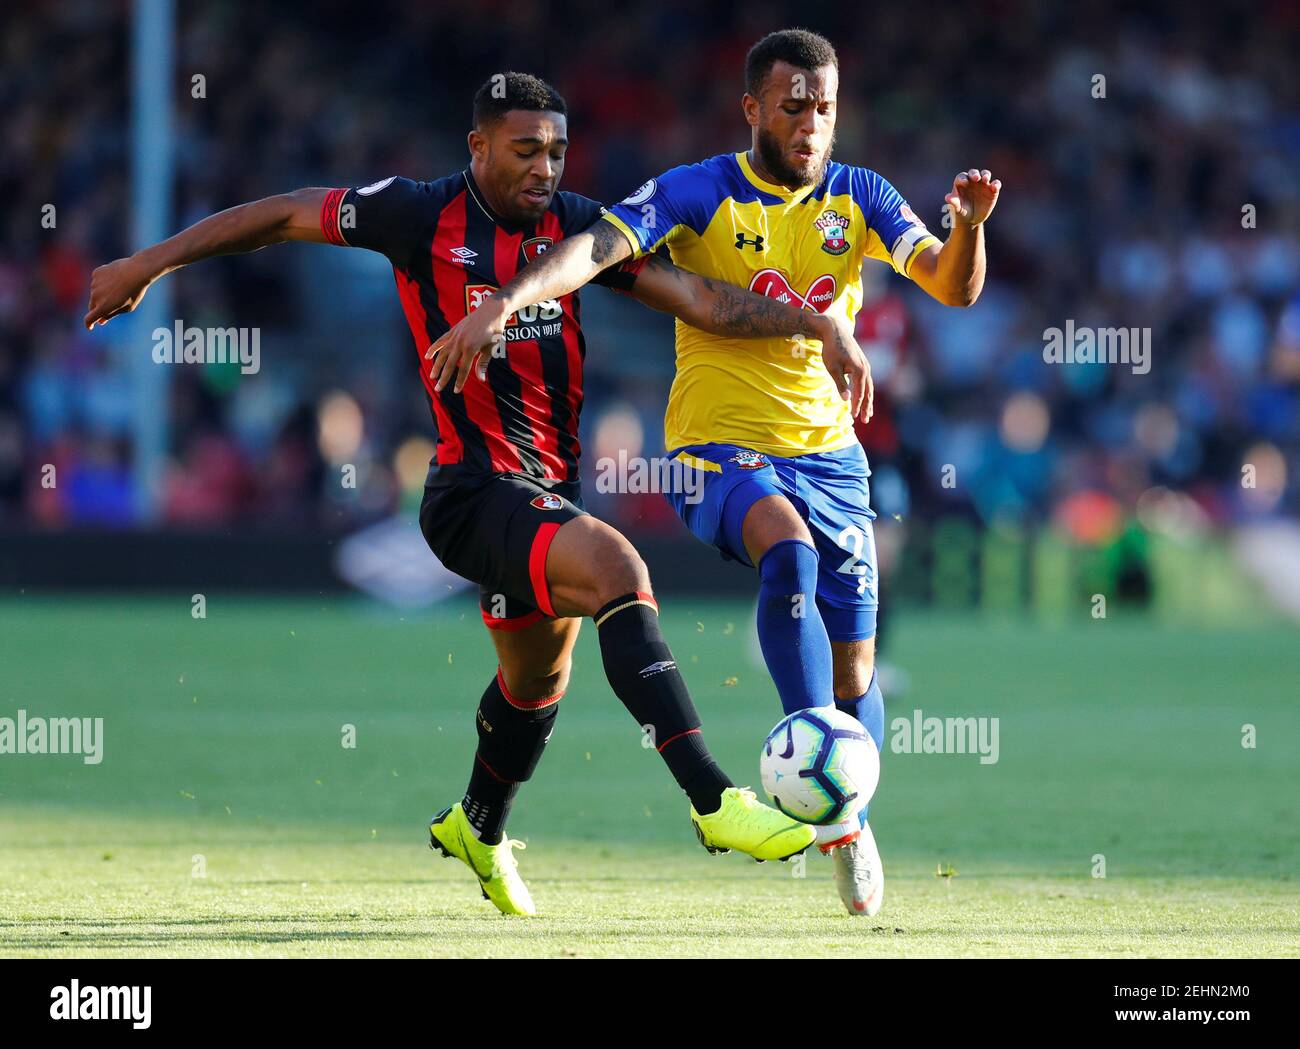 Soccer Football - Premier League - AFC Bournemouth v Southampton - Vitality Stadium, Bournemouth, Britain - October 20, 2018  Bournemouth's Jordon Ibe in action with Southampton's Nathan Redmond   REUTERS/Eddie Keogh  EDITORIAL USE ONLY. No use with unauthorized audio, video, data, fixture lists, club/league logos or "live" services. Online in-match use limited to 75 images, no video emulation. No use in betting, games or single club/league/player publications.  Please contact your account representative for further details. Stock Photo